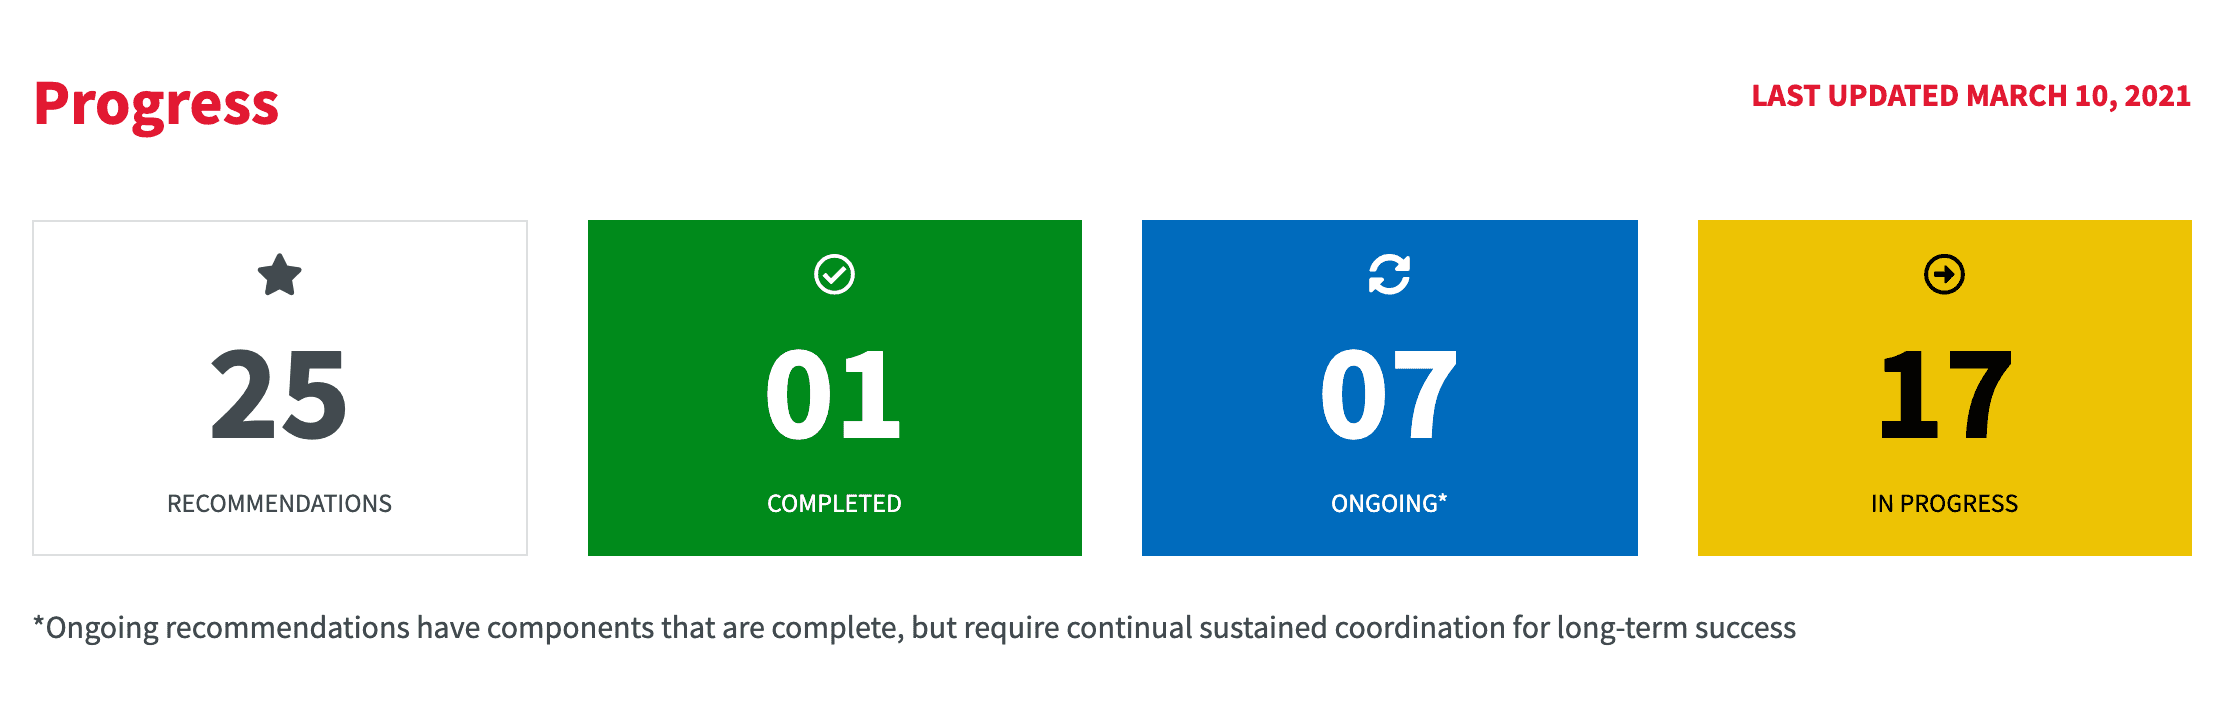 Screenshot of the Critical Issues Dashboard progress section